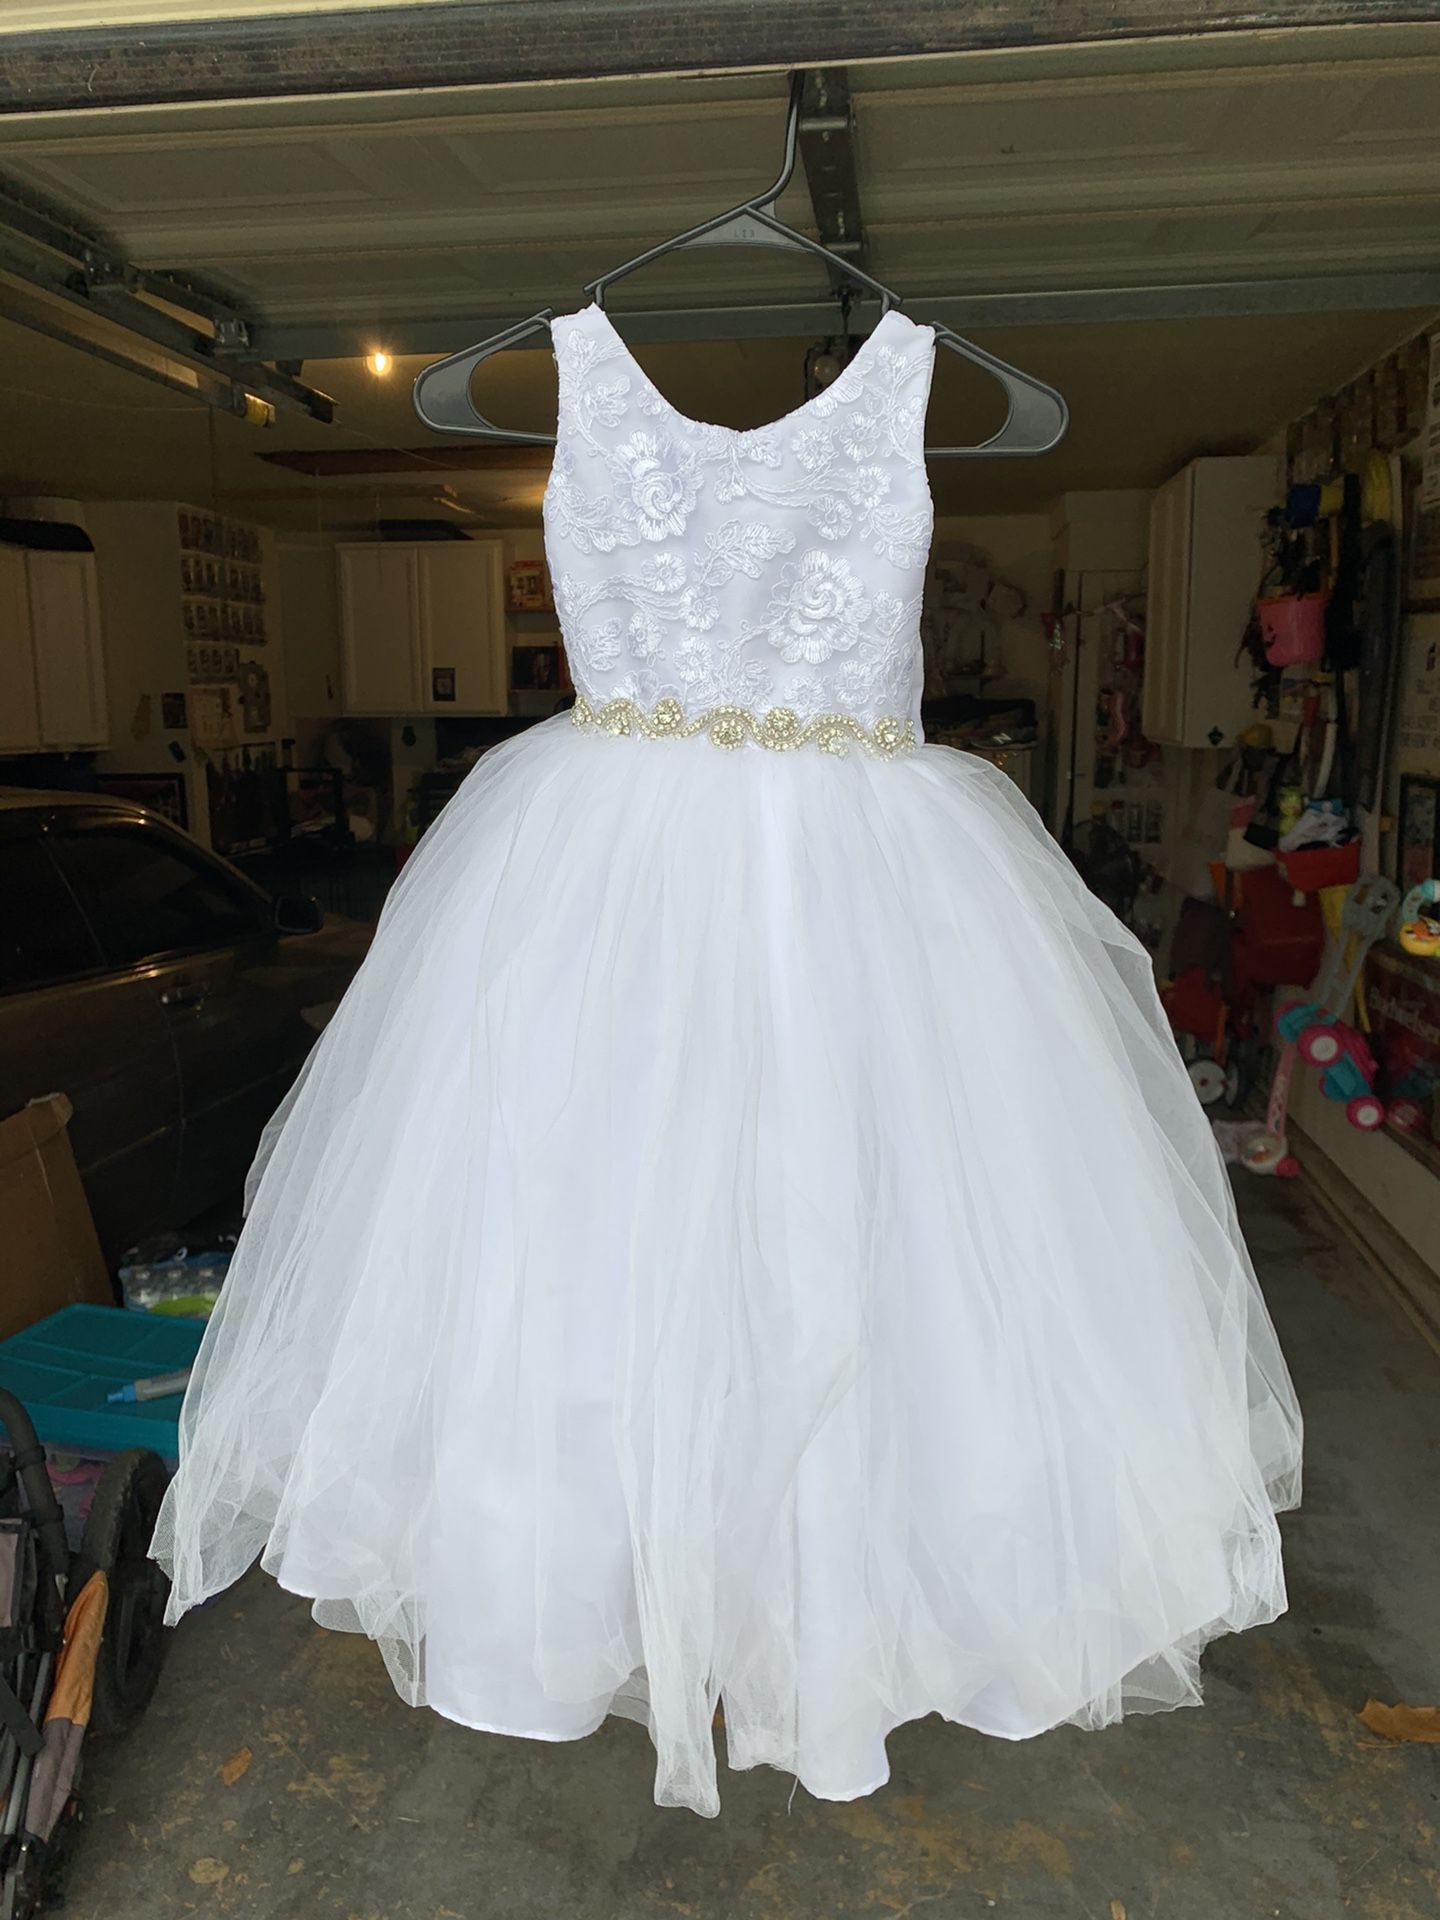 Wedding dress, quince (child’s) size 4-shoes 10- flower girl shirt-xs jacket size 5